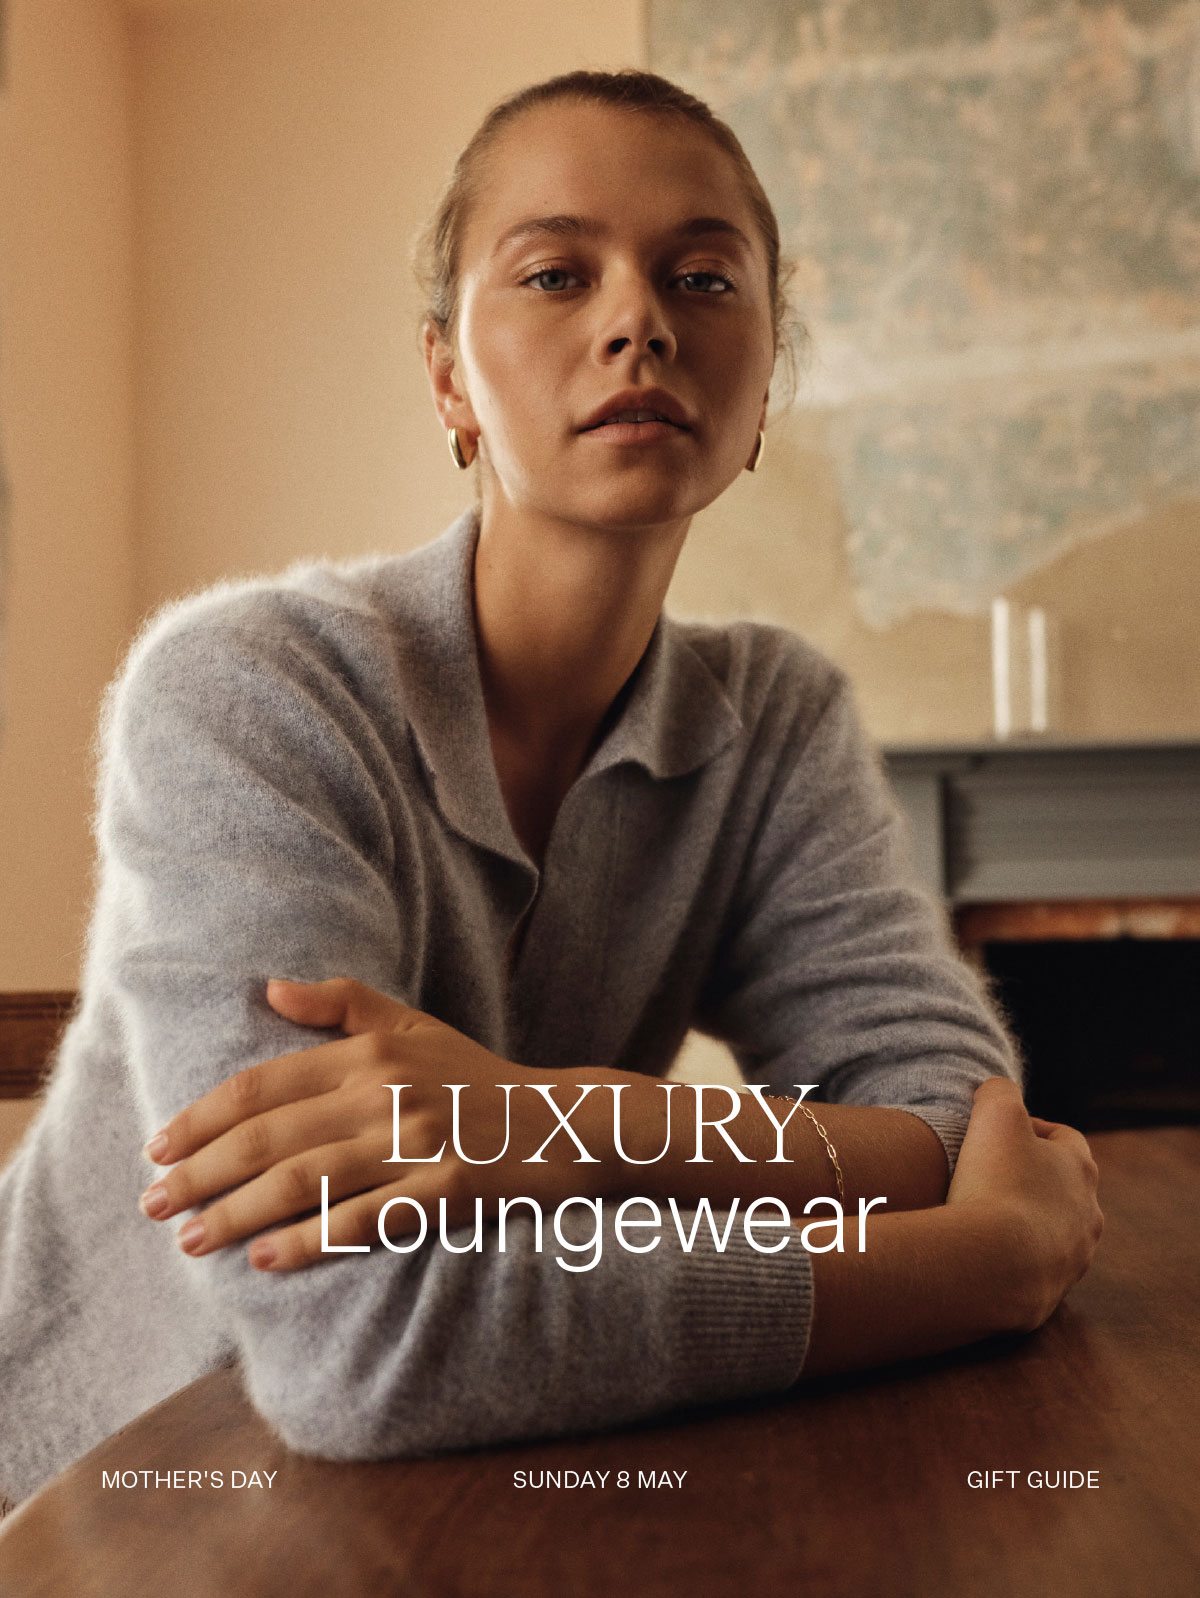 LUXURY Loungewear | MOTHER'S DAY SUNDAY 8 MAY GIFT GUIDE